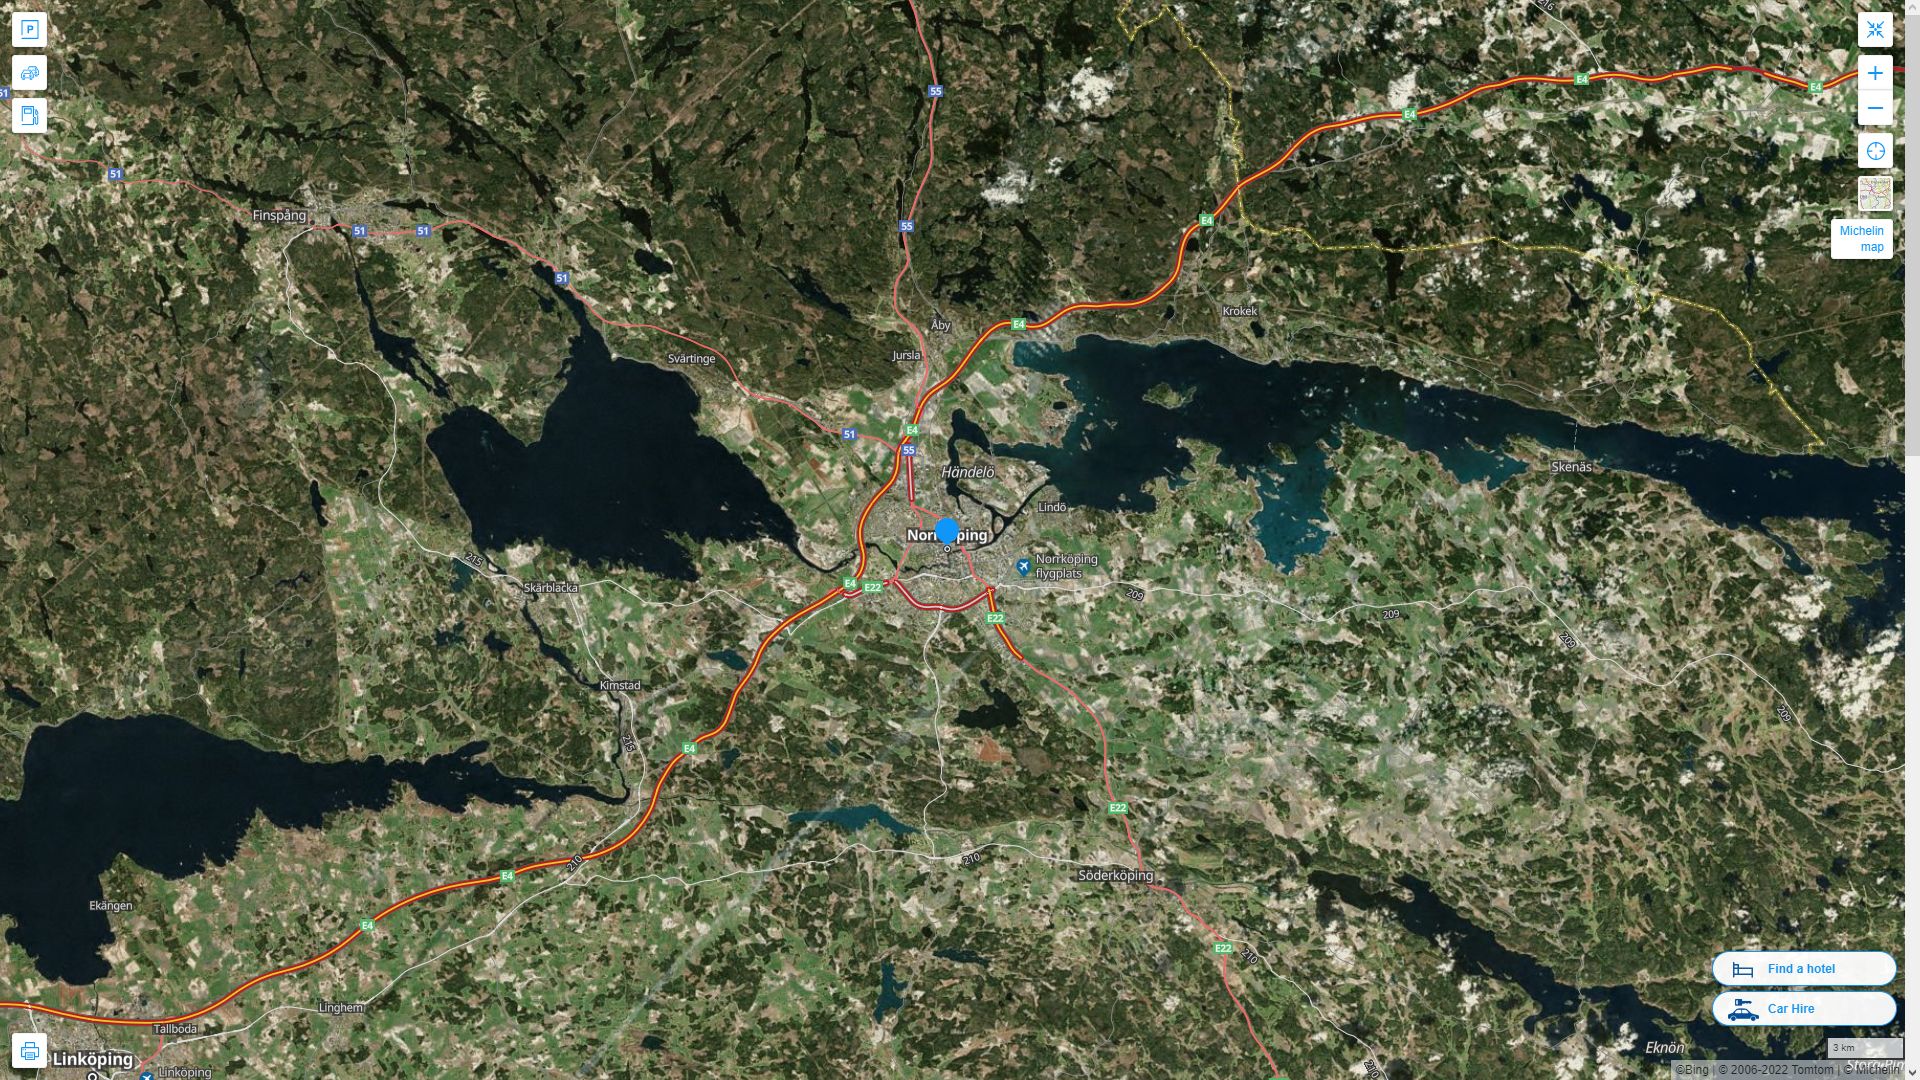 Norrkoping Highway and Road Map with Satellite View